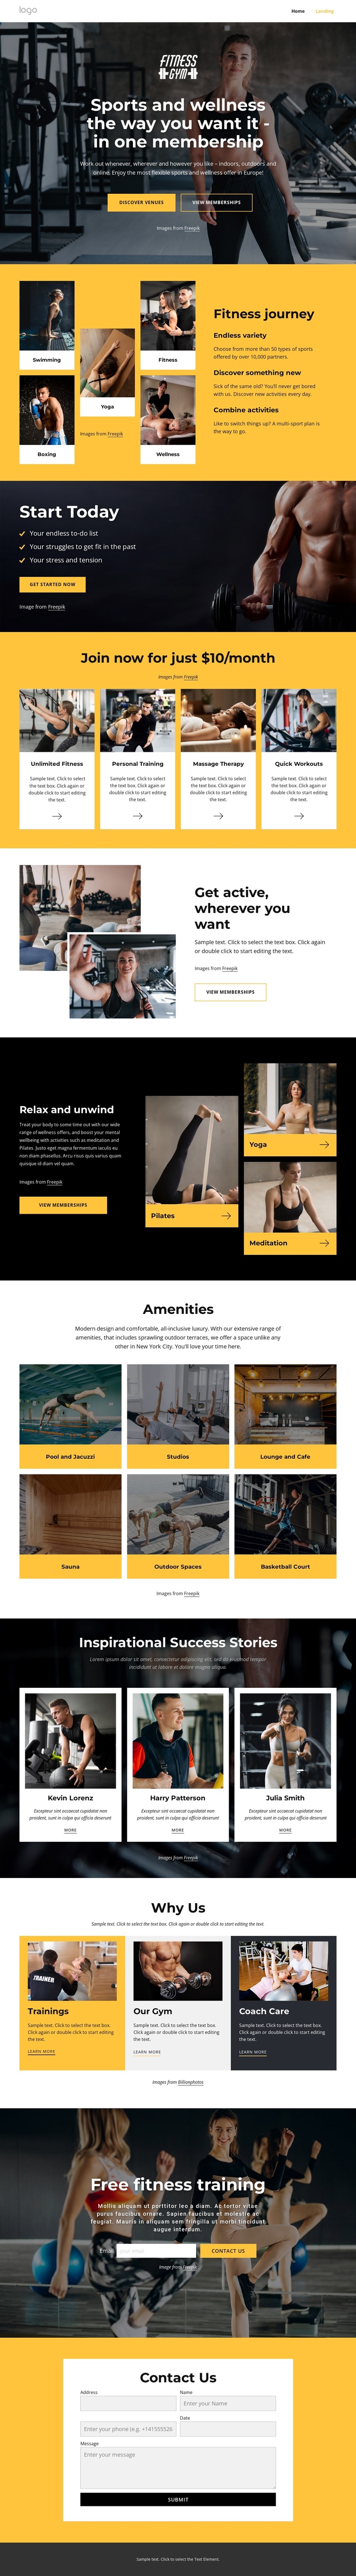 Gym, swimming, fitness classes Joomla Page Builder